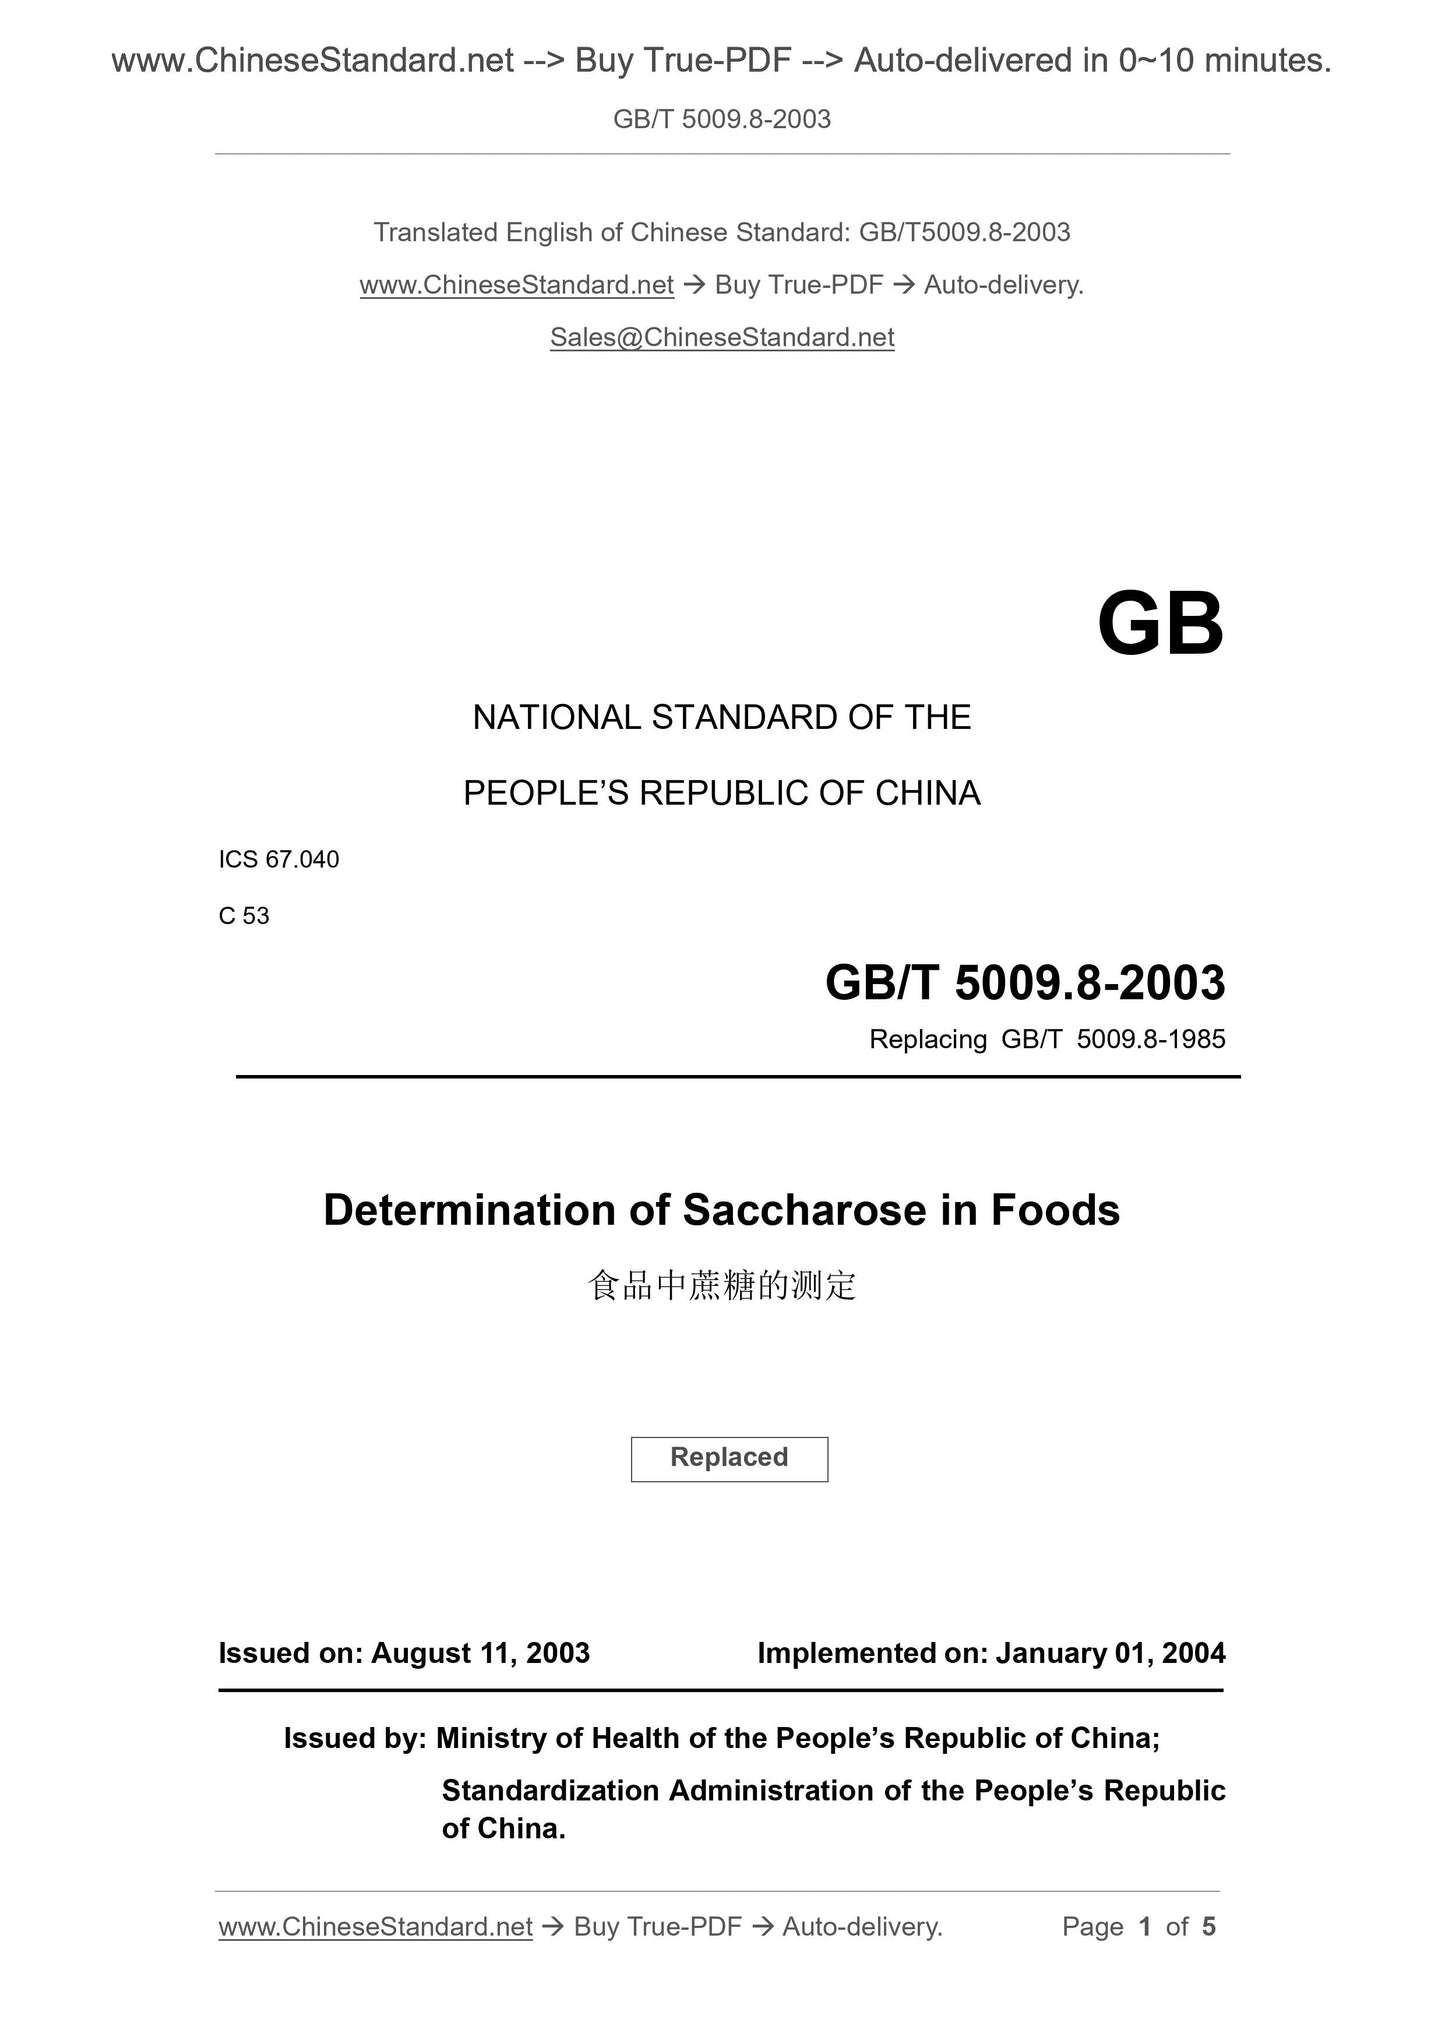 GB/T 5009.8-2003 Page 1